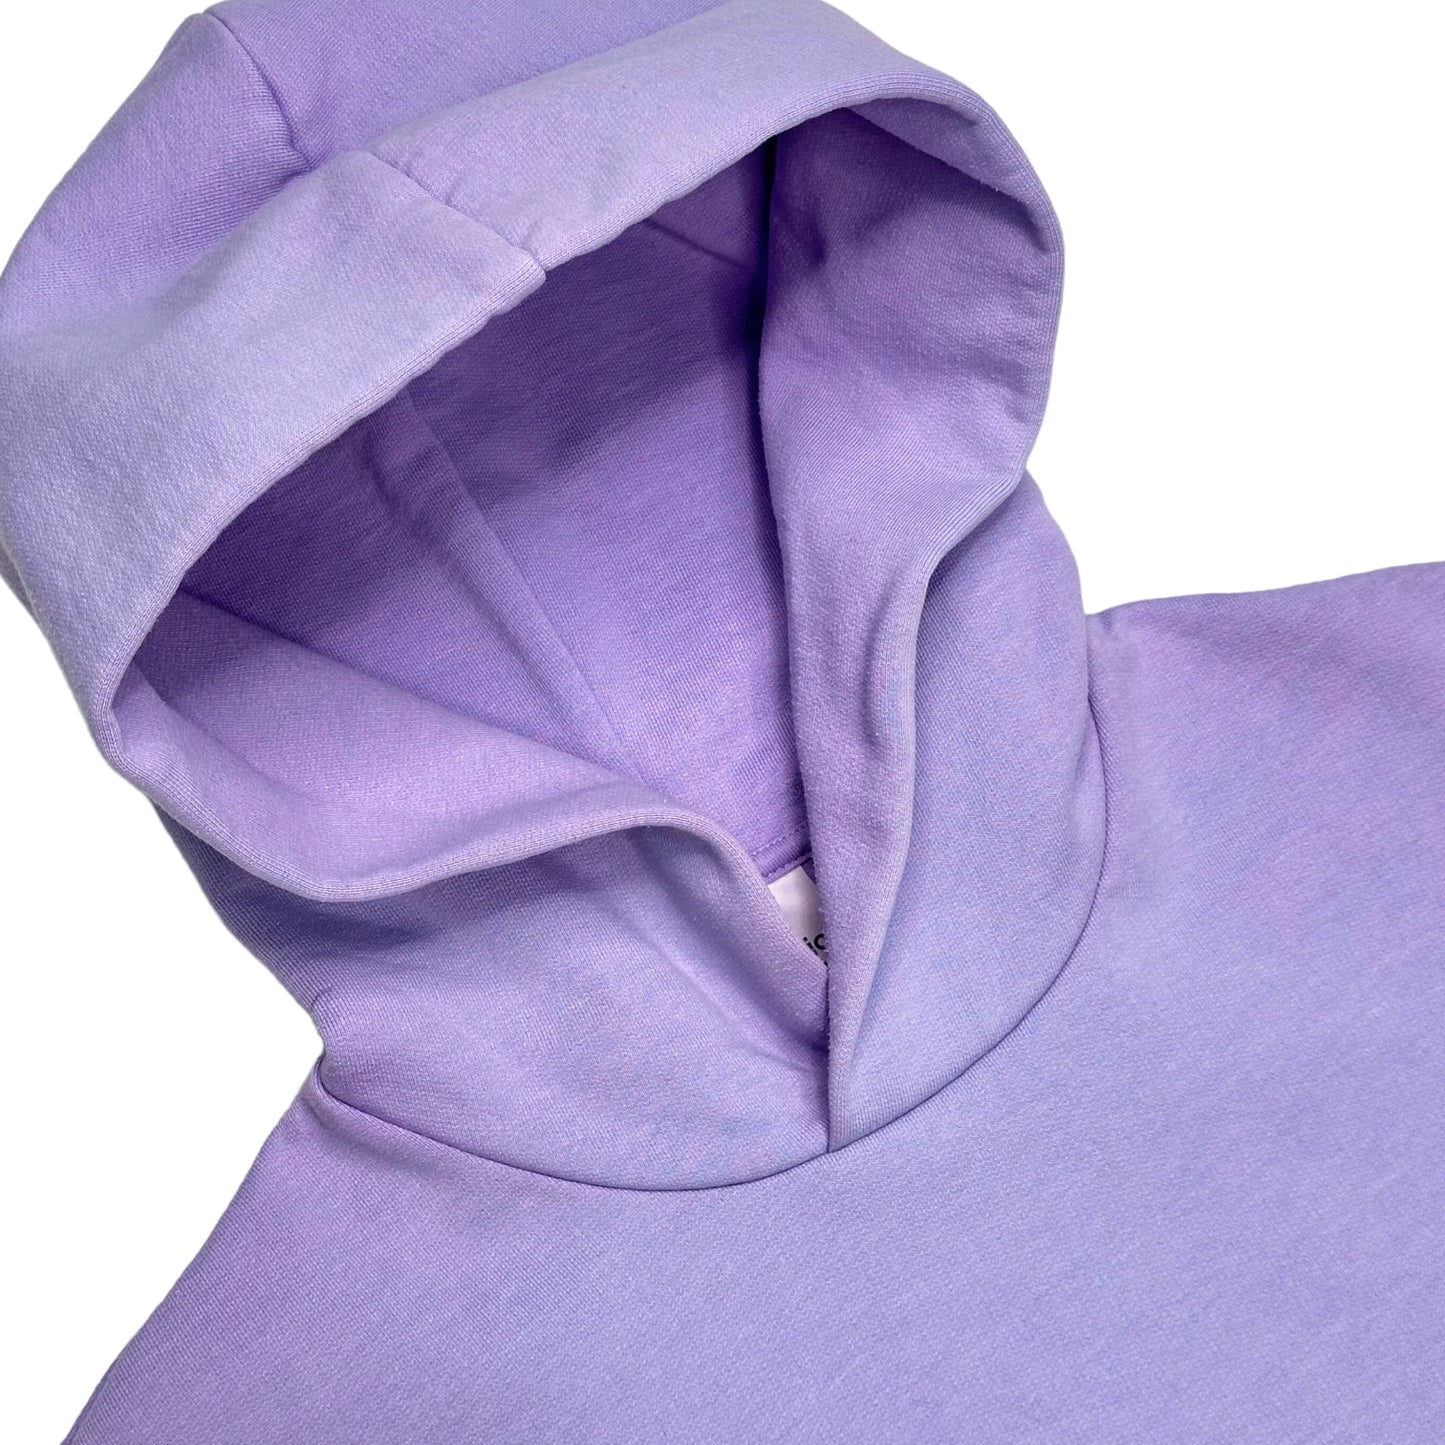 Acne Studios Relaxed Fit Hooded Sweatshirt